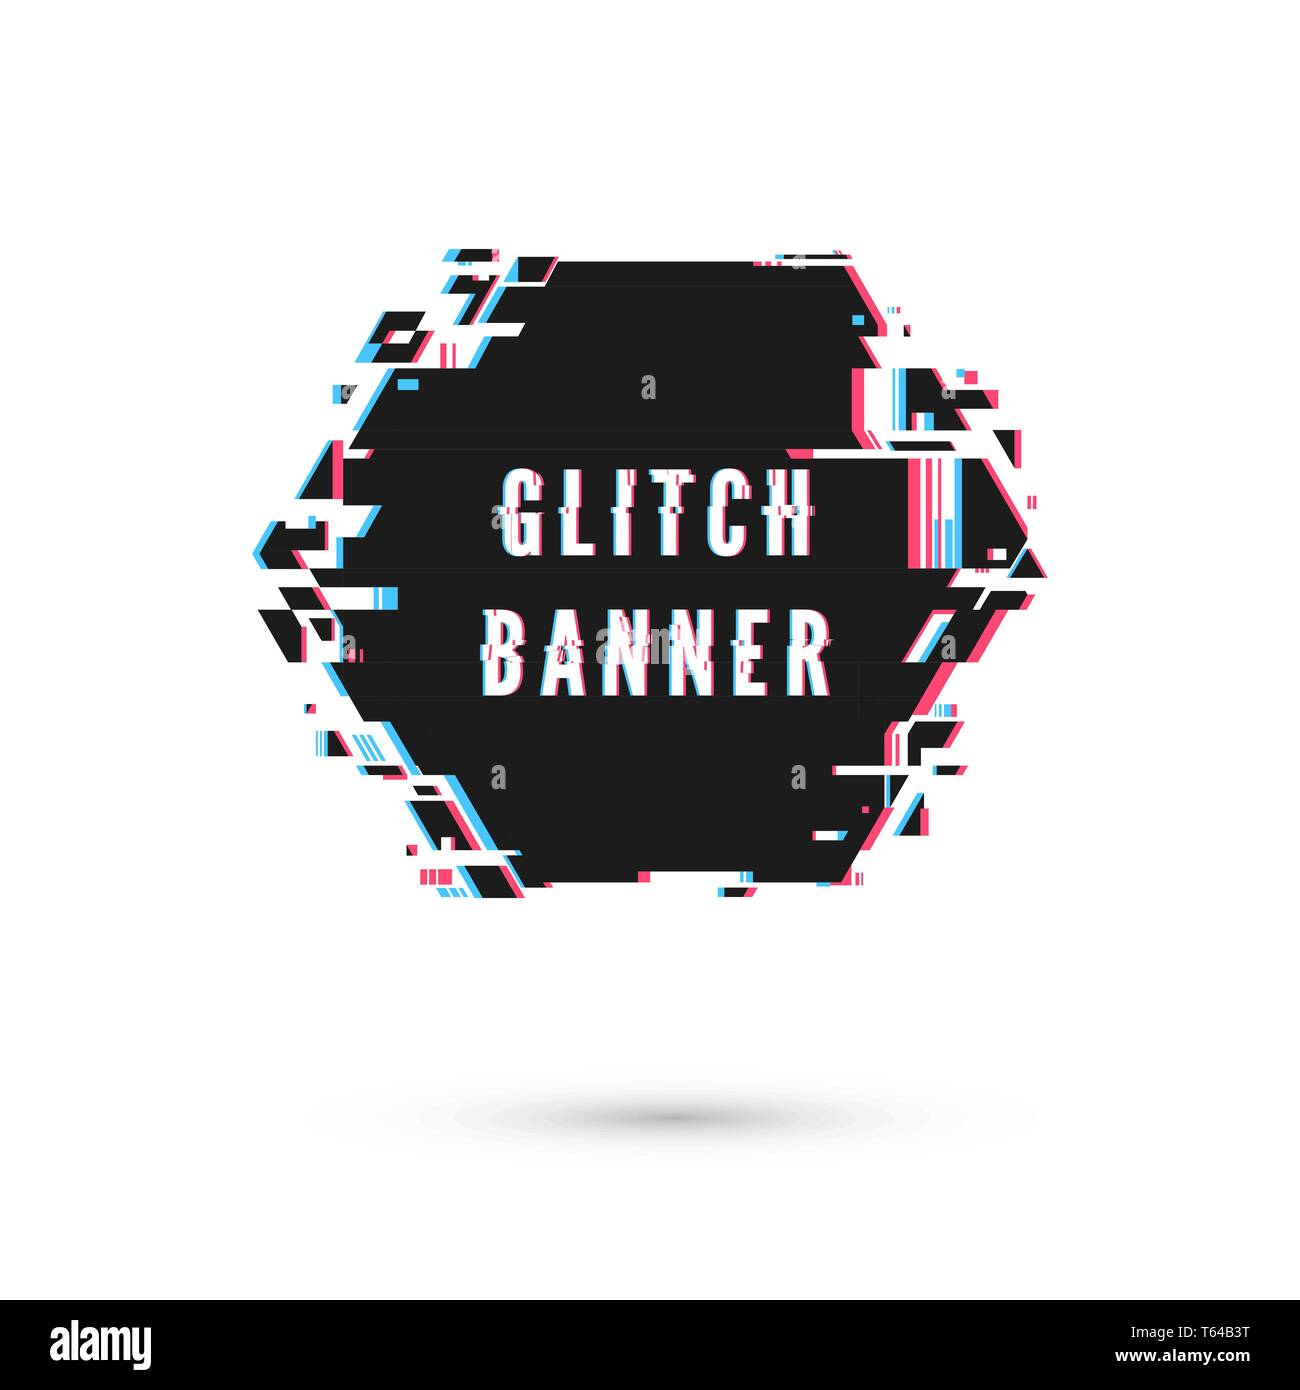 Hexagonal banner form in distorted glitch style. Vector illustration isolated on white background Stock Vector